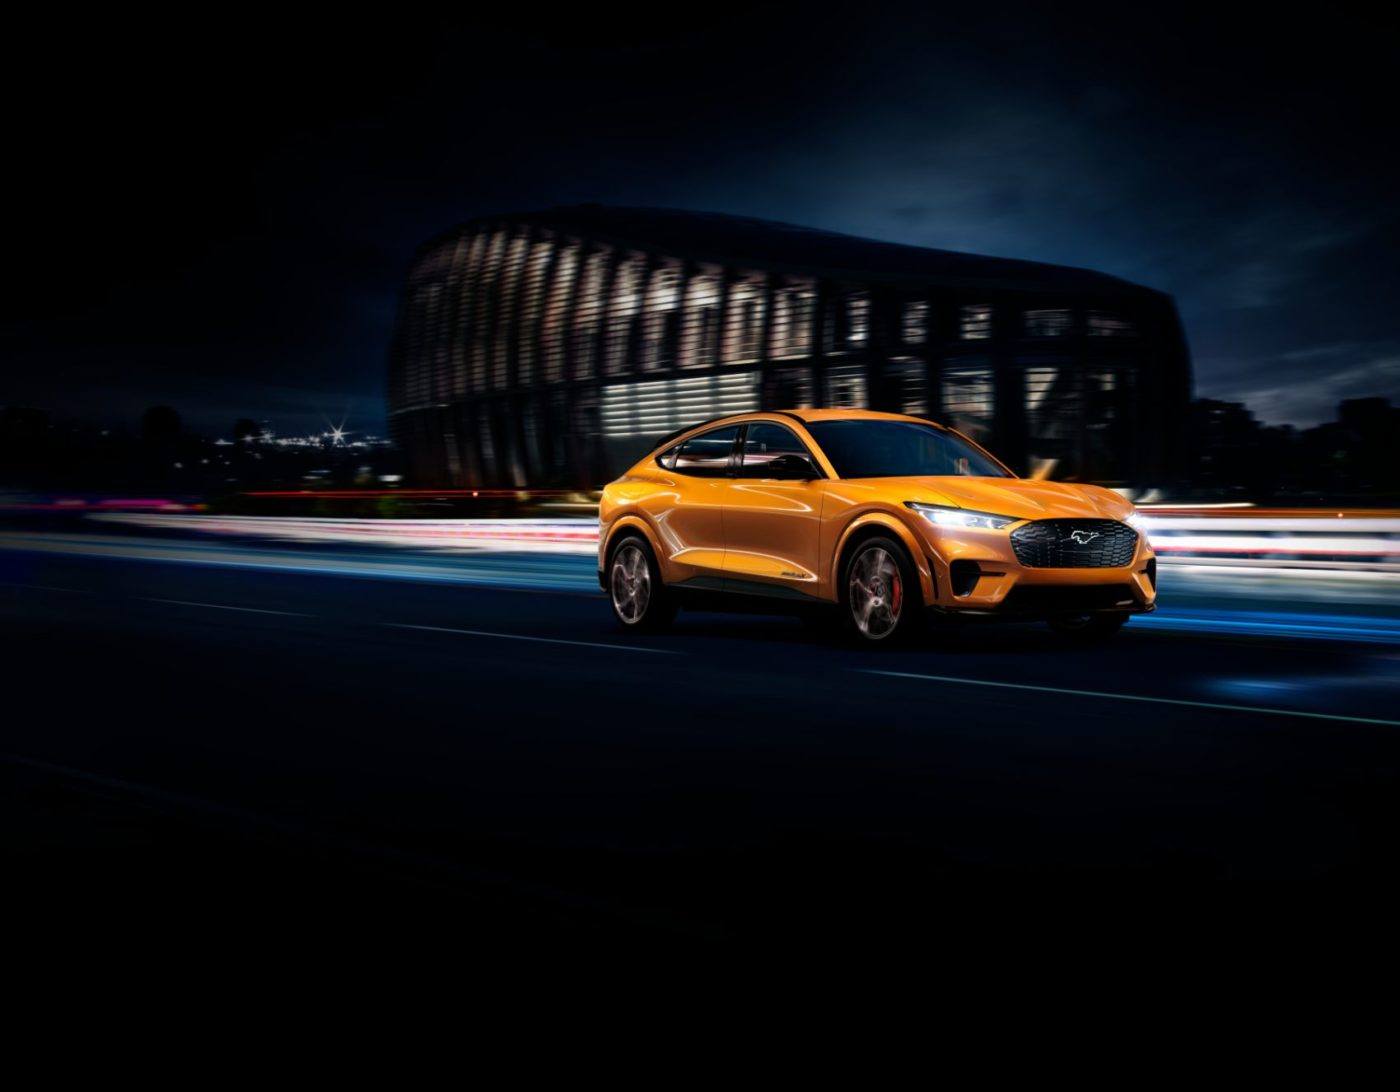 2021 Ford Mustang Mach-E Cyber Orange Front Profile